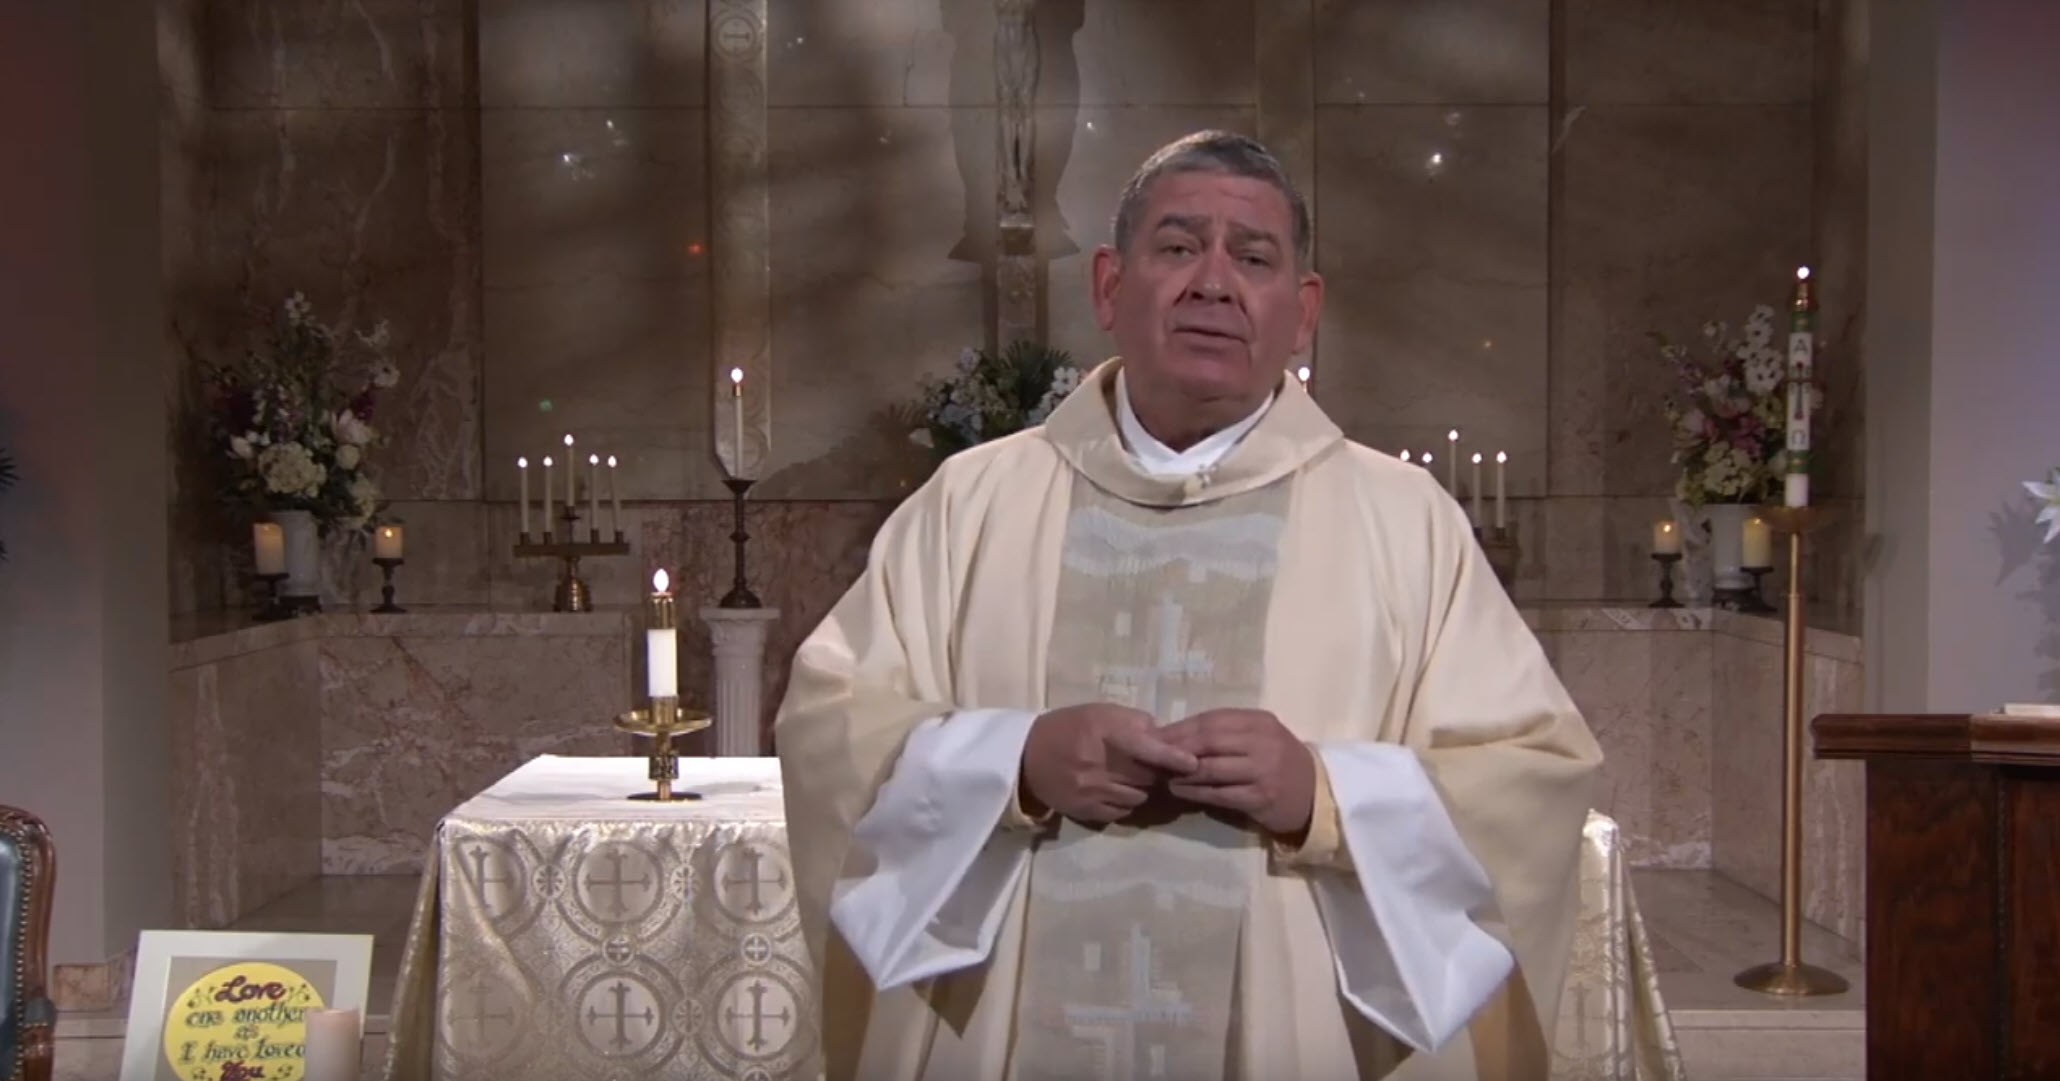 Fr. Scott Donahue celebrates the Fifth Sunday of Easter